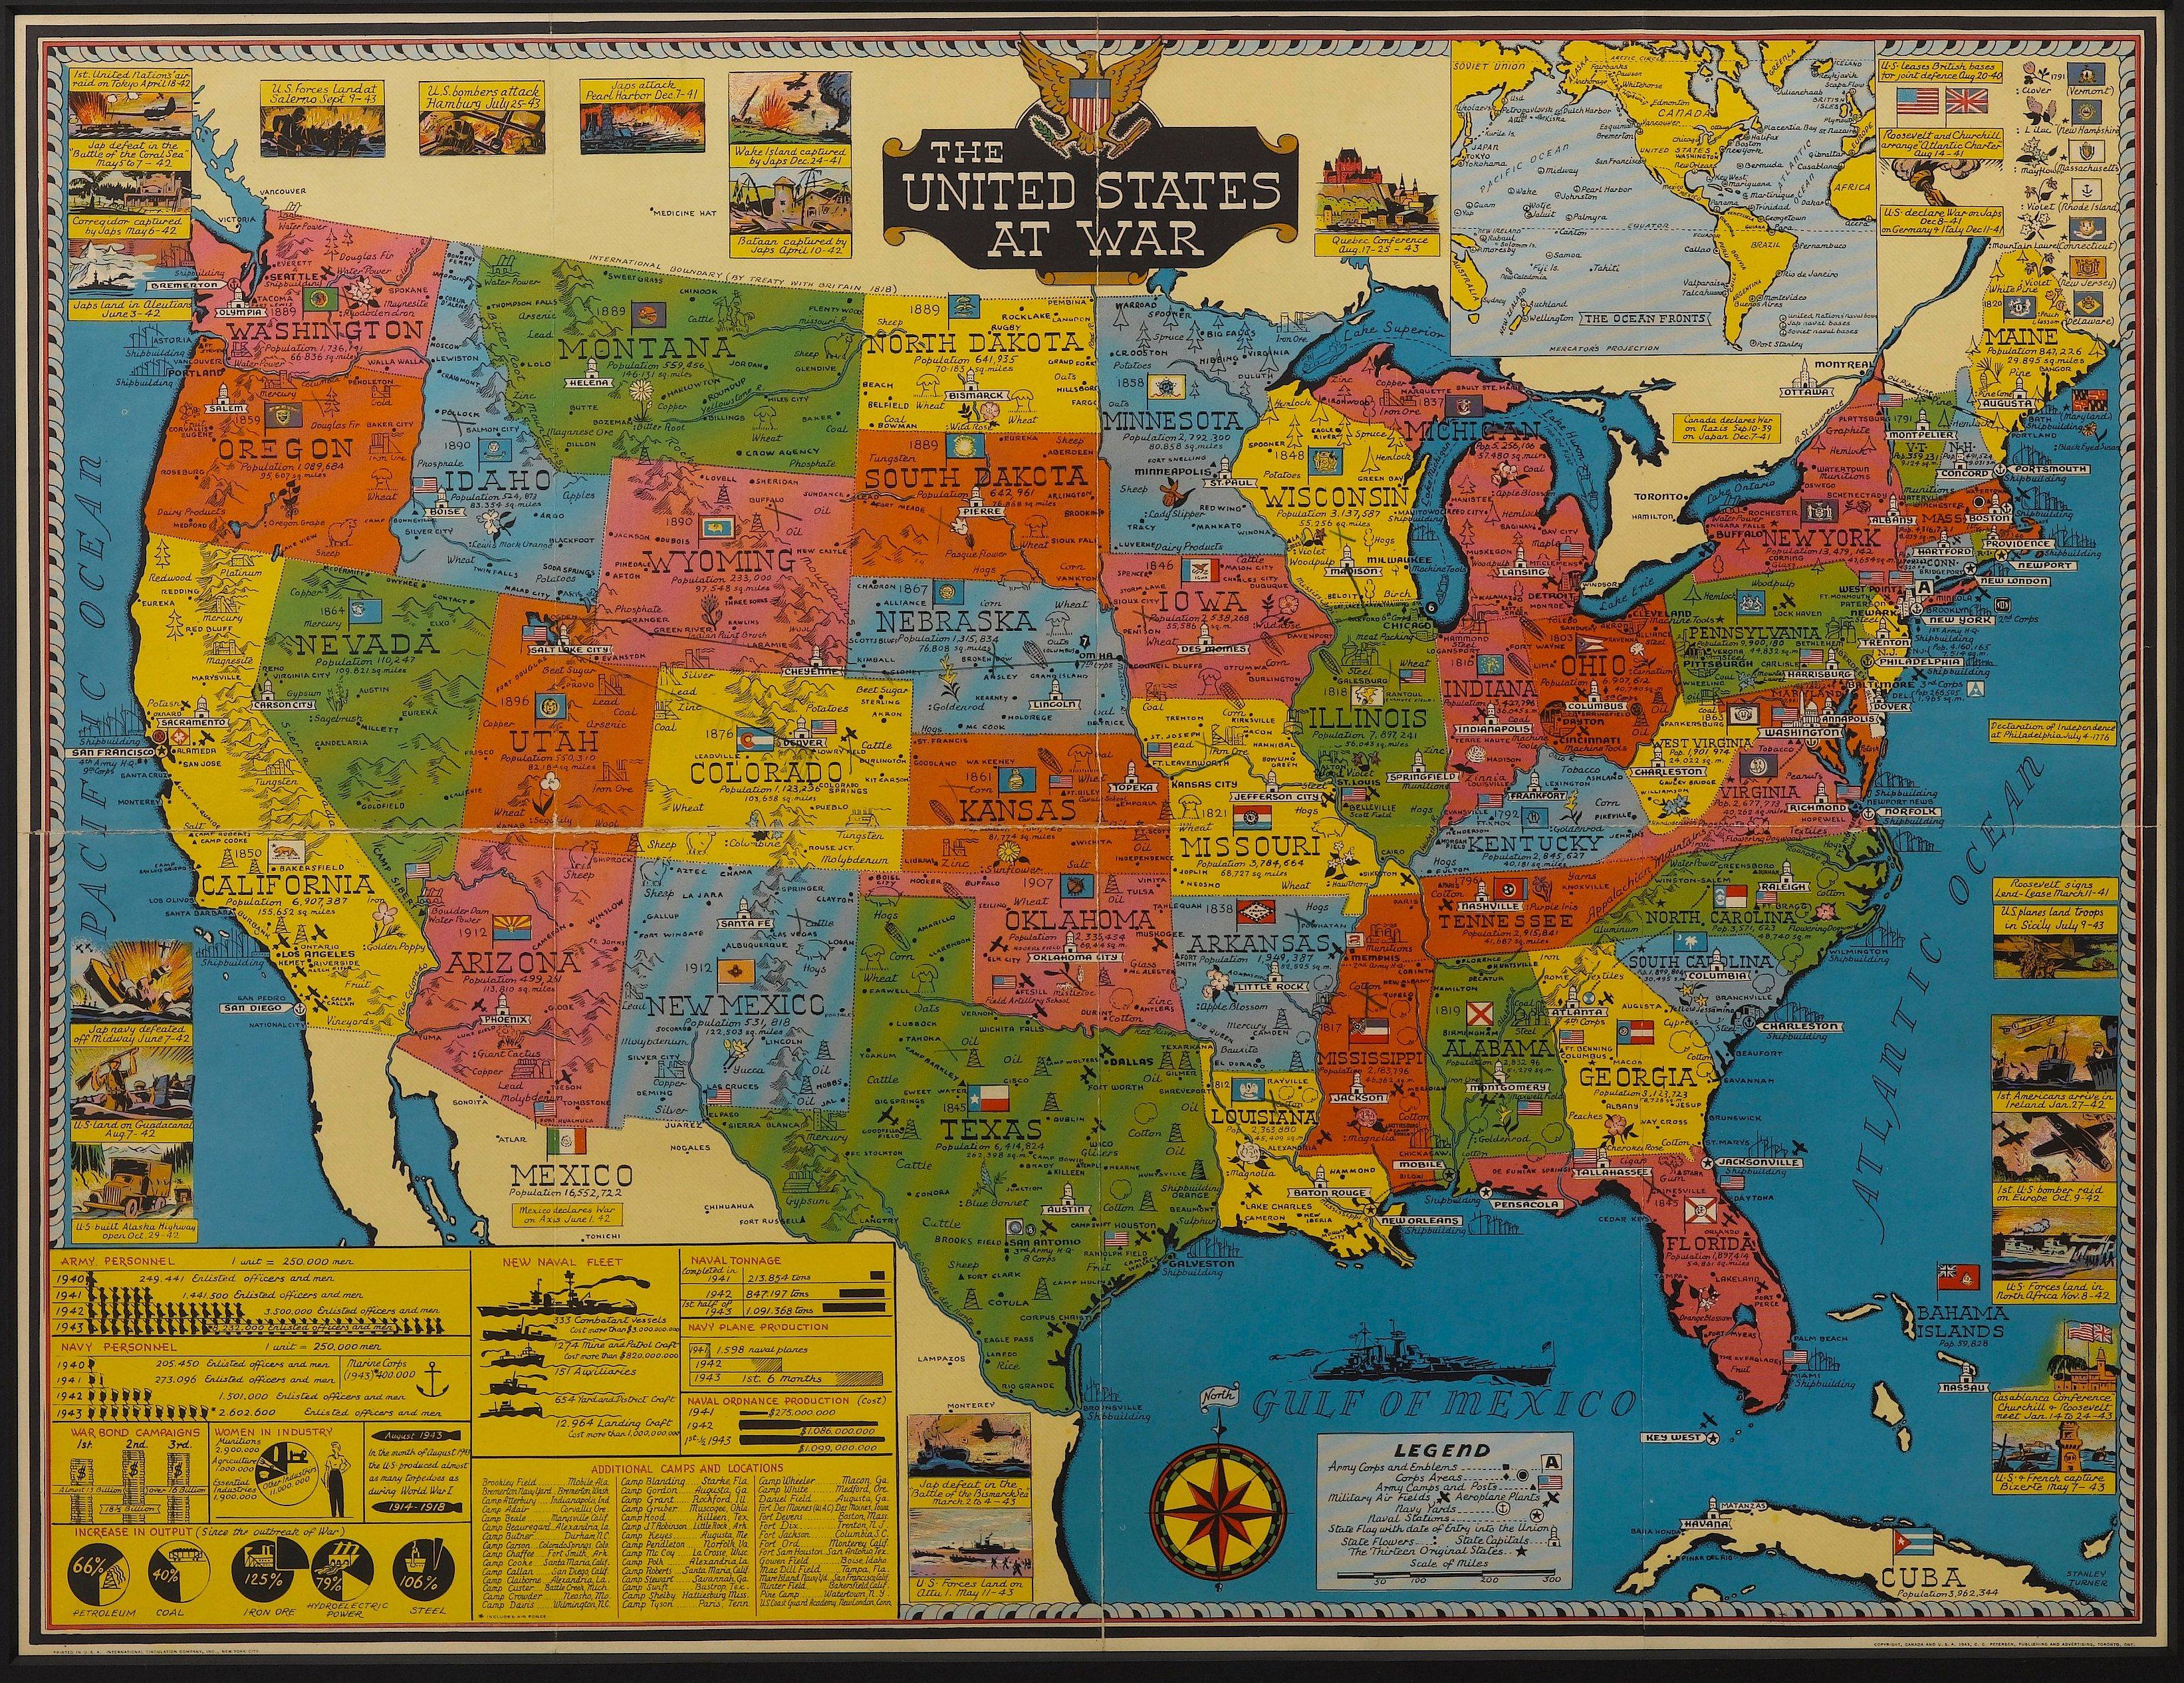 A striking pictorial map by Stanley Turner, published in 1943. The map presents the United States during World War II and is so titled “United States at War.” Around the map’s edges are several vignette illustrations depicting key historical